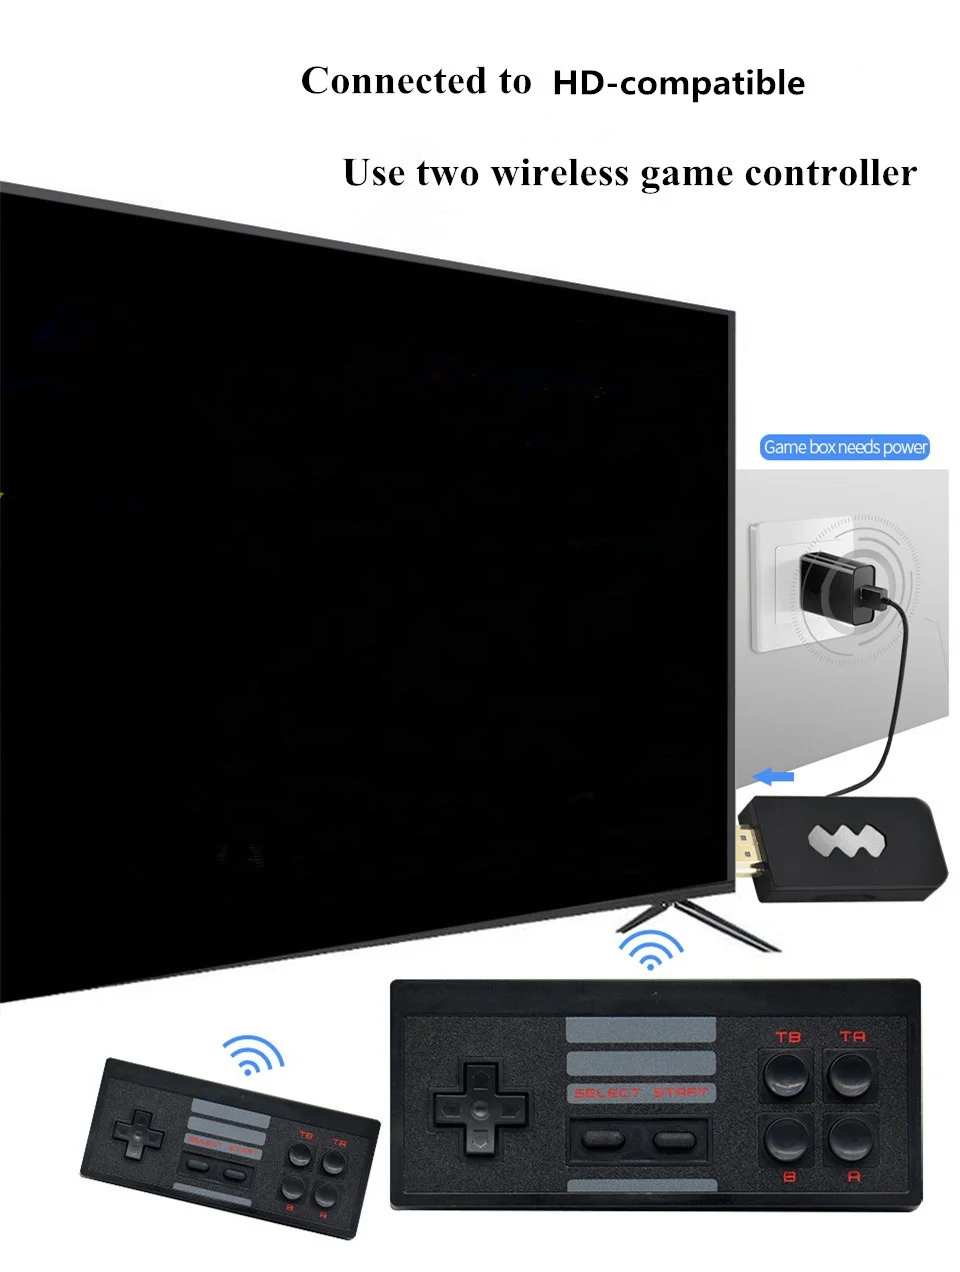 HDTV Retro Video Out 818 TV Game Stick 4k Video Game Handheld Console with 2 Wireless 2.4G Dual Player Joystick